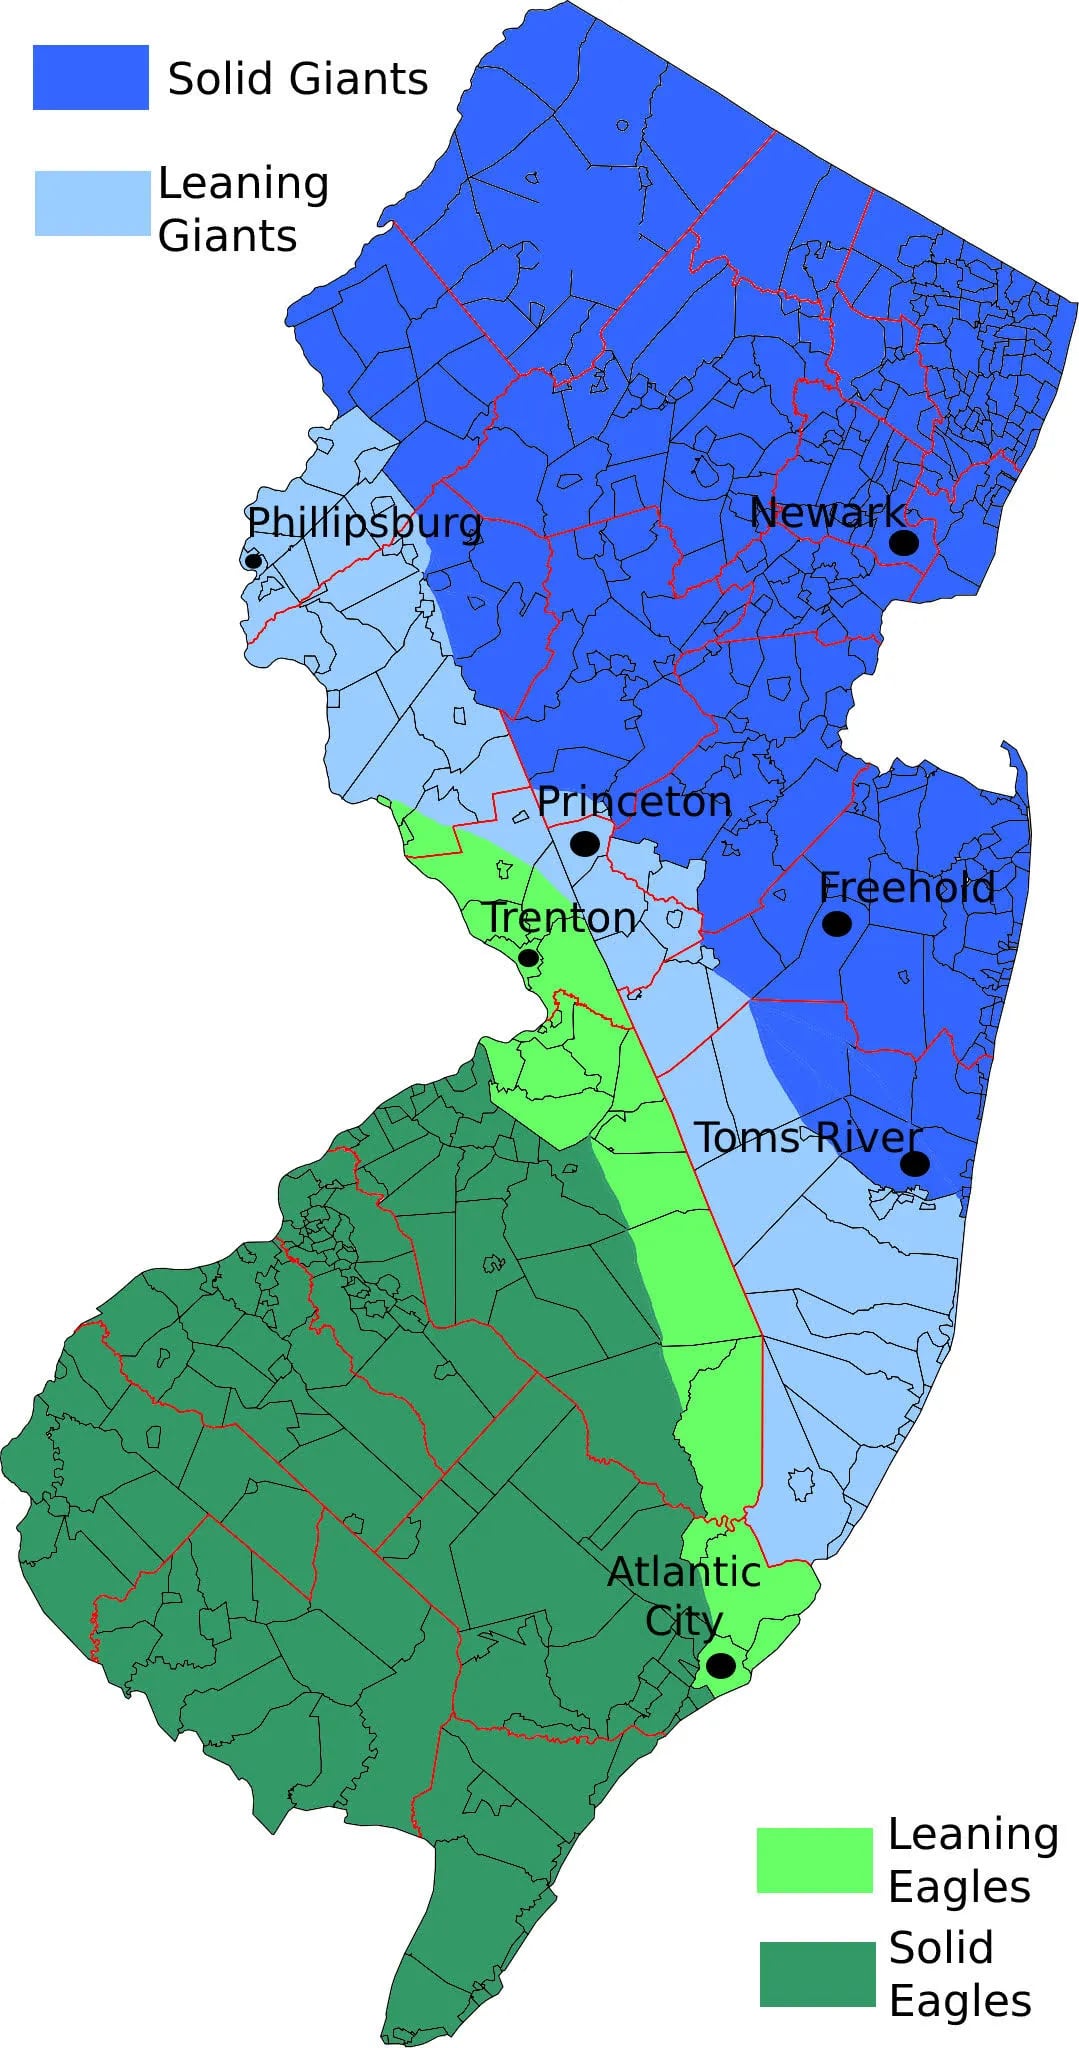 Bordentown, NJ is almost evenly split between Eagles and Giants